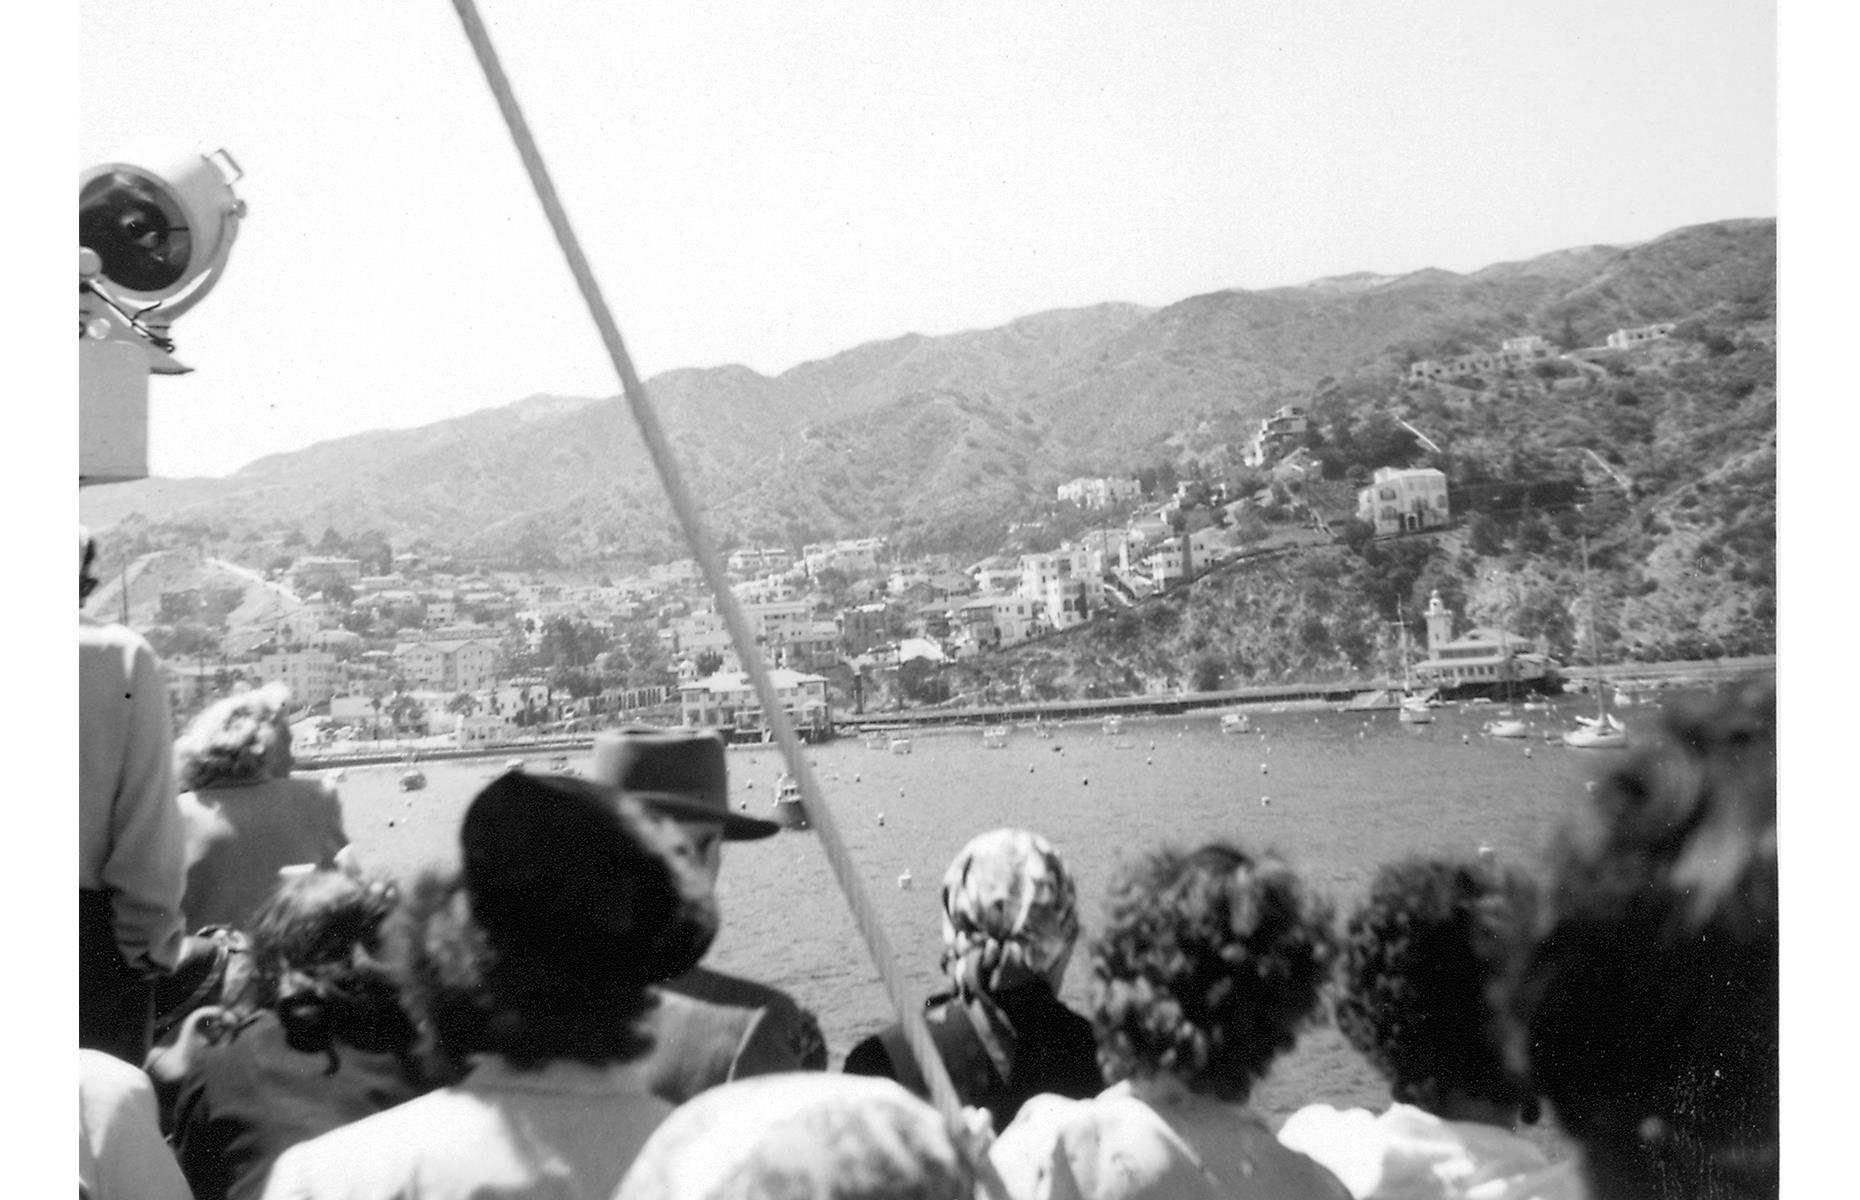 This photograph was taken some two decades later and shows the continued popularity of the Southern California isle. Here, in 1954, tourists clamor to see the view on a boat ride that skirts the island.